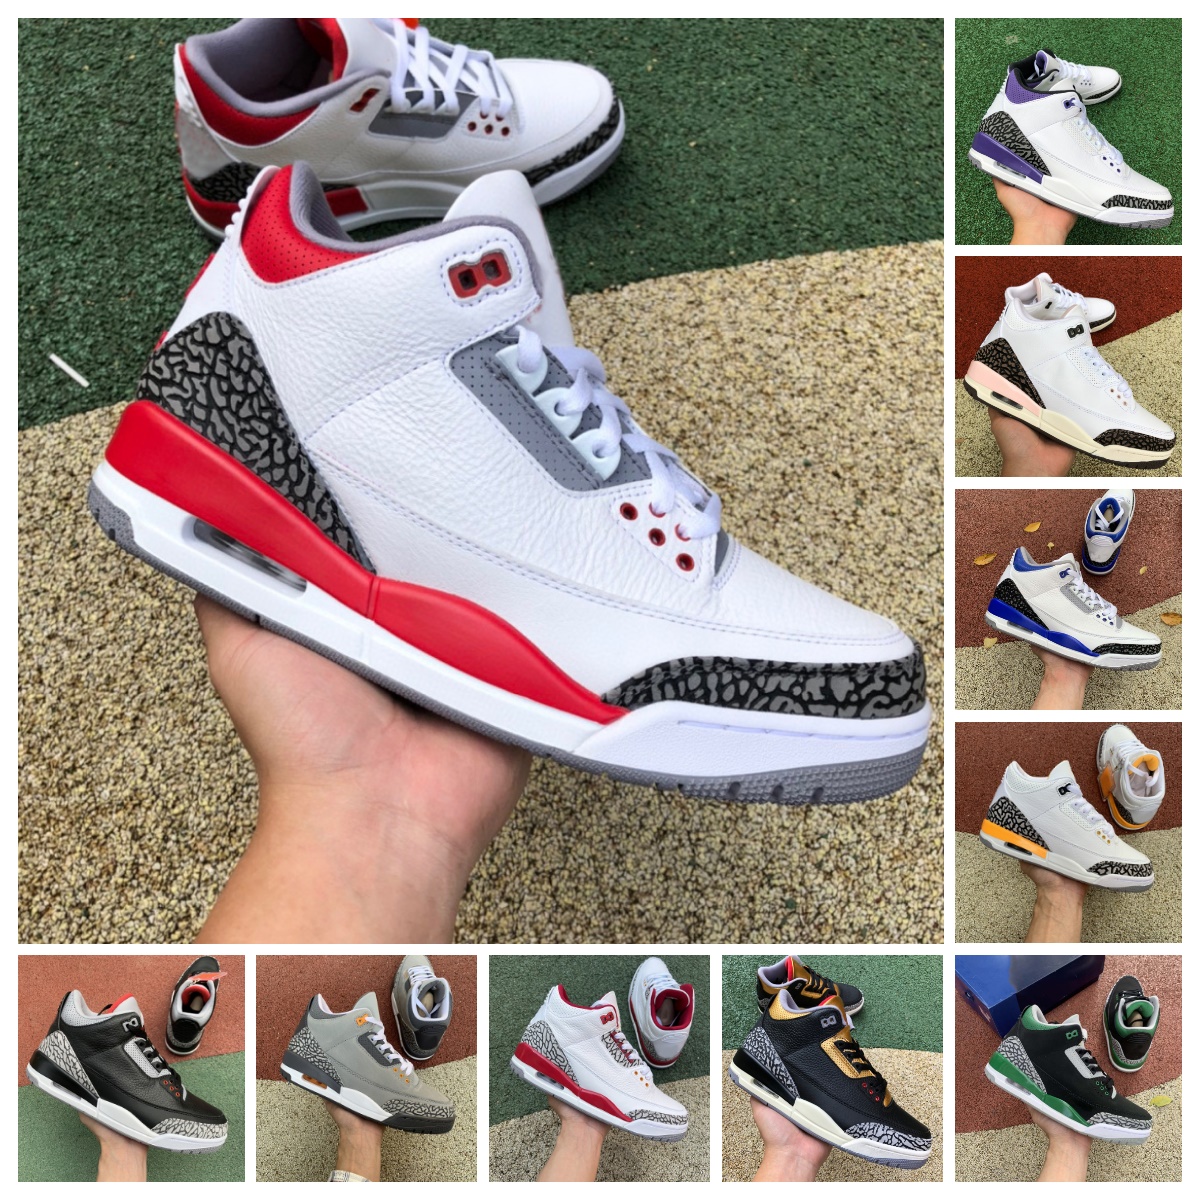 

Jumpman Fire Red 3 3s Basketball Shoes Neapolitan Dark Mocha Midnight Navy Racer Blue Fragment Unc Court Purple Cool Grey Pine Green Black Cement Mens Sports Sneakers, Bubble package bag